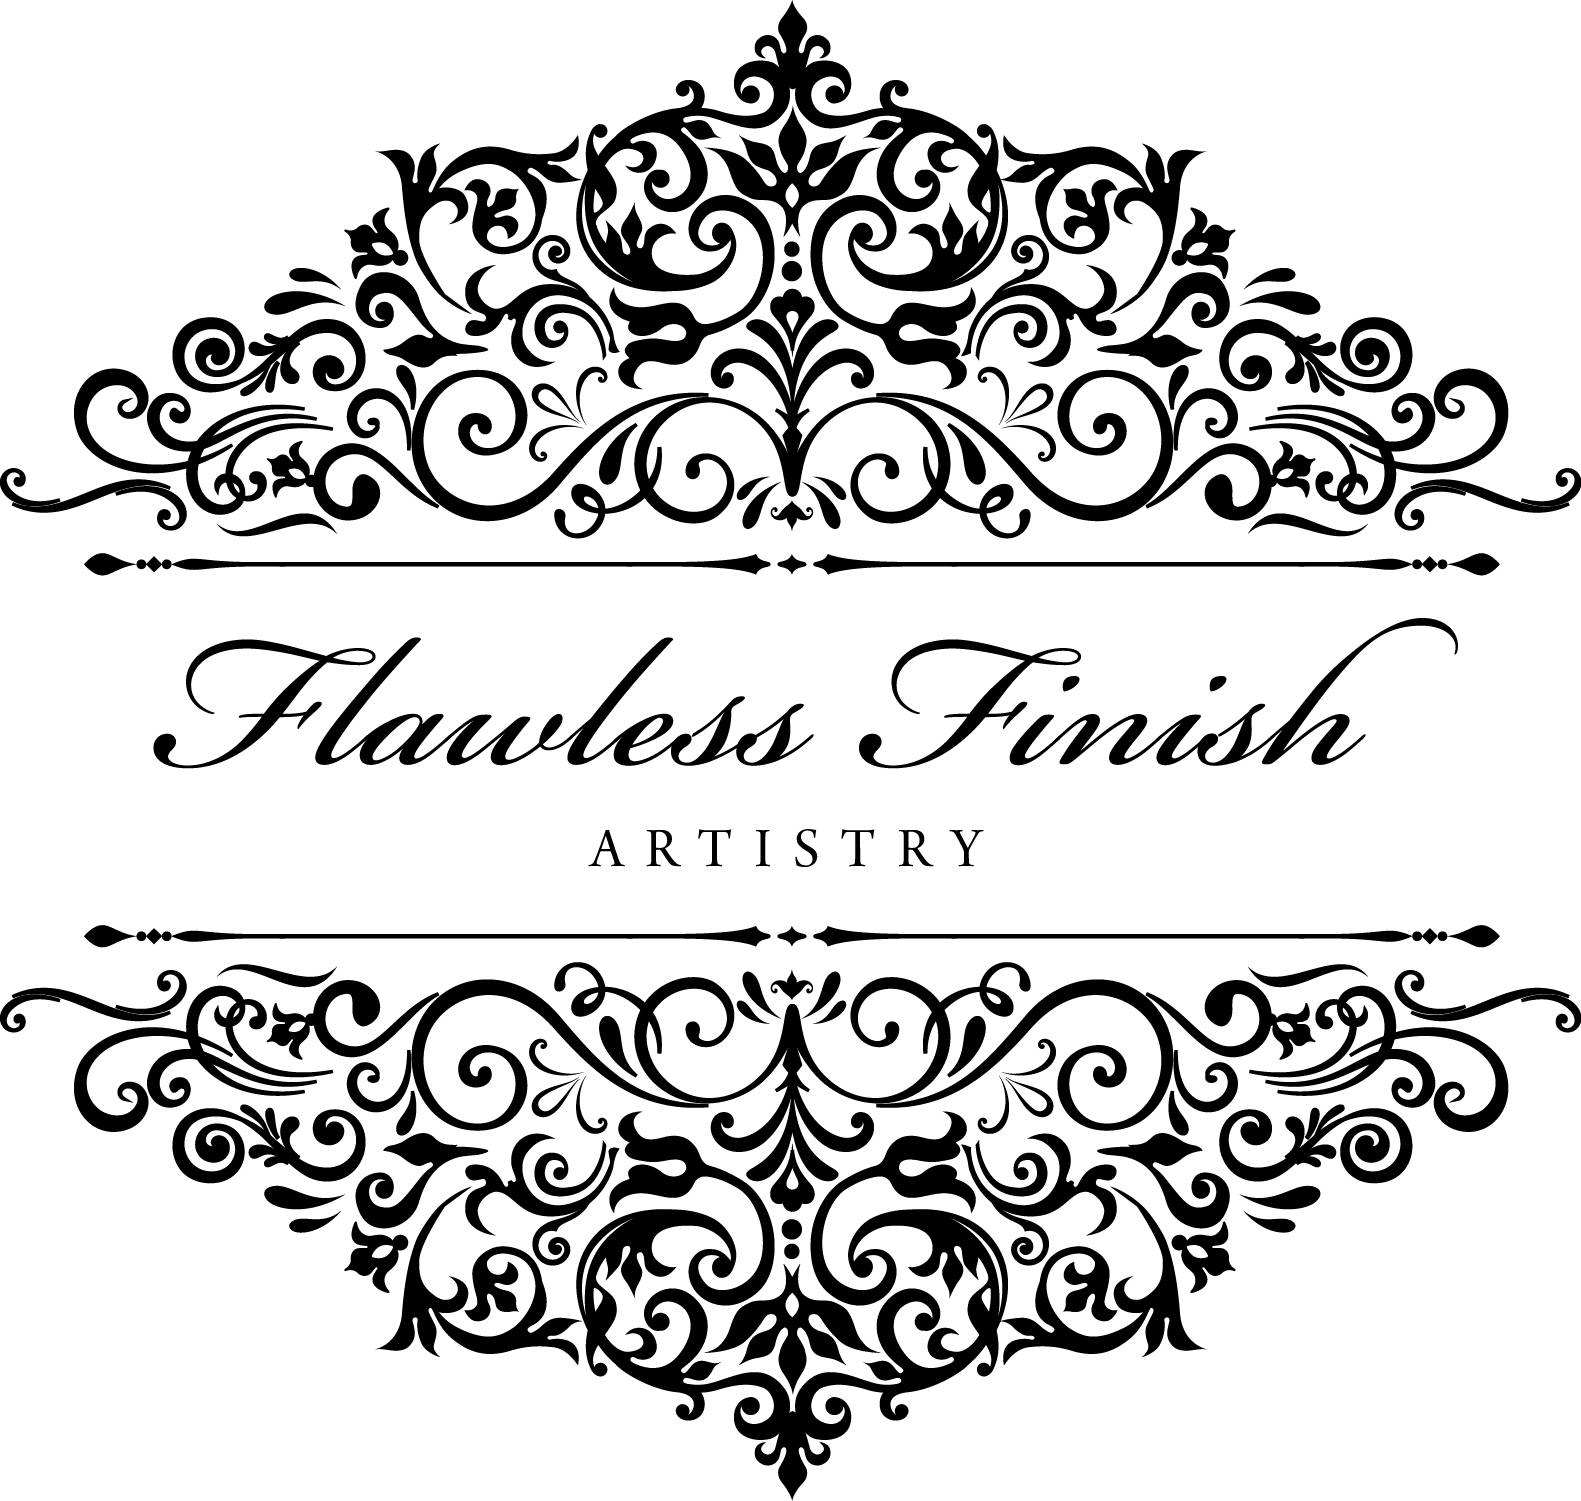 Flawless Finish ArtistryHome